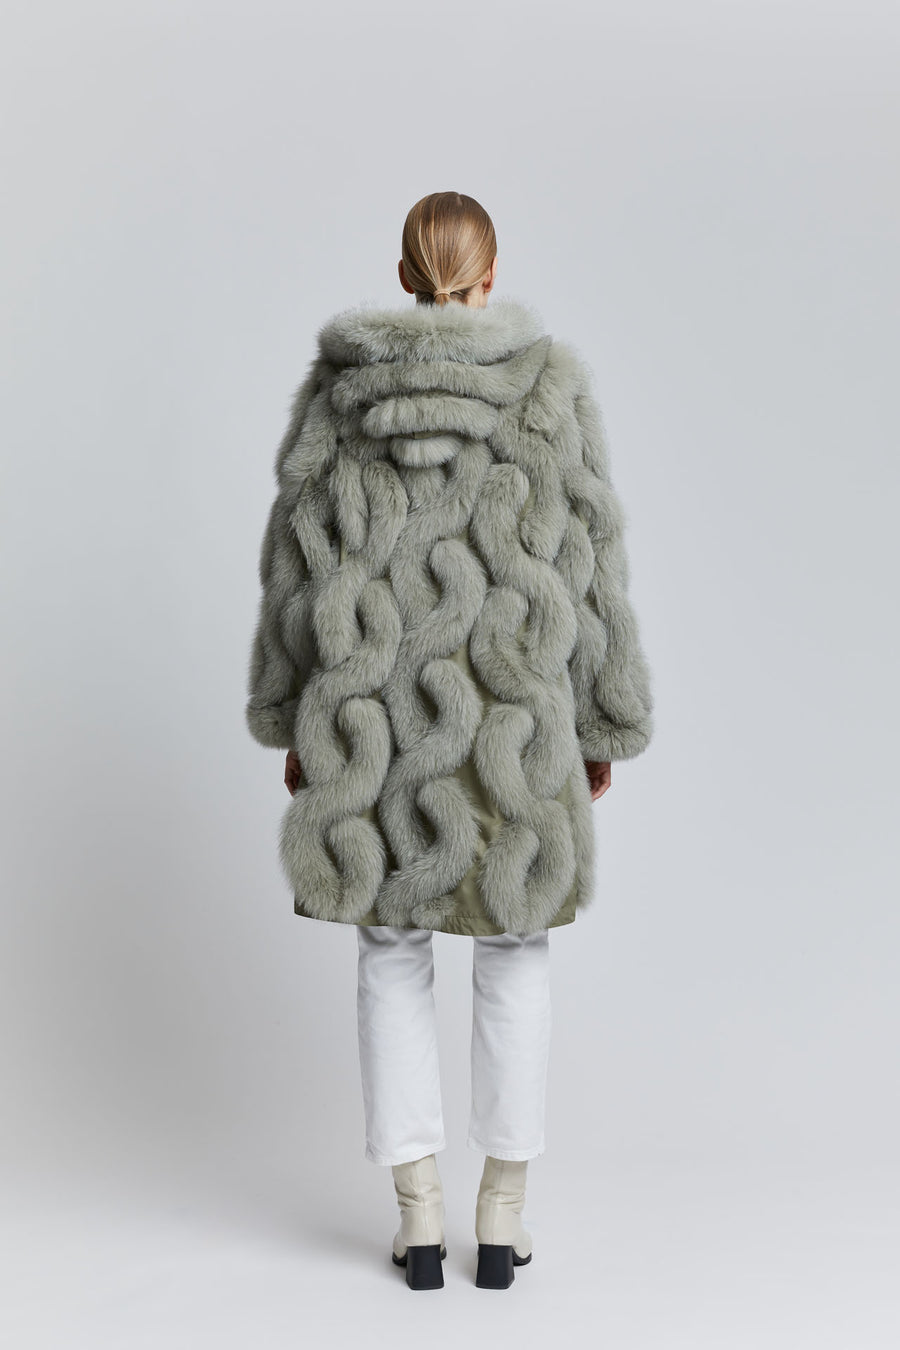 iconic fur coat with a hood Designed and Made in Finland